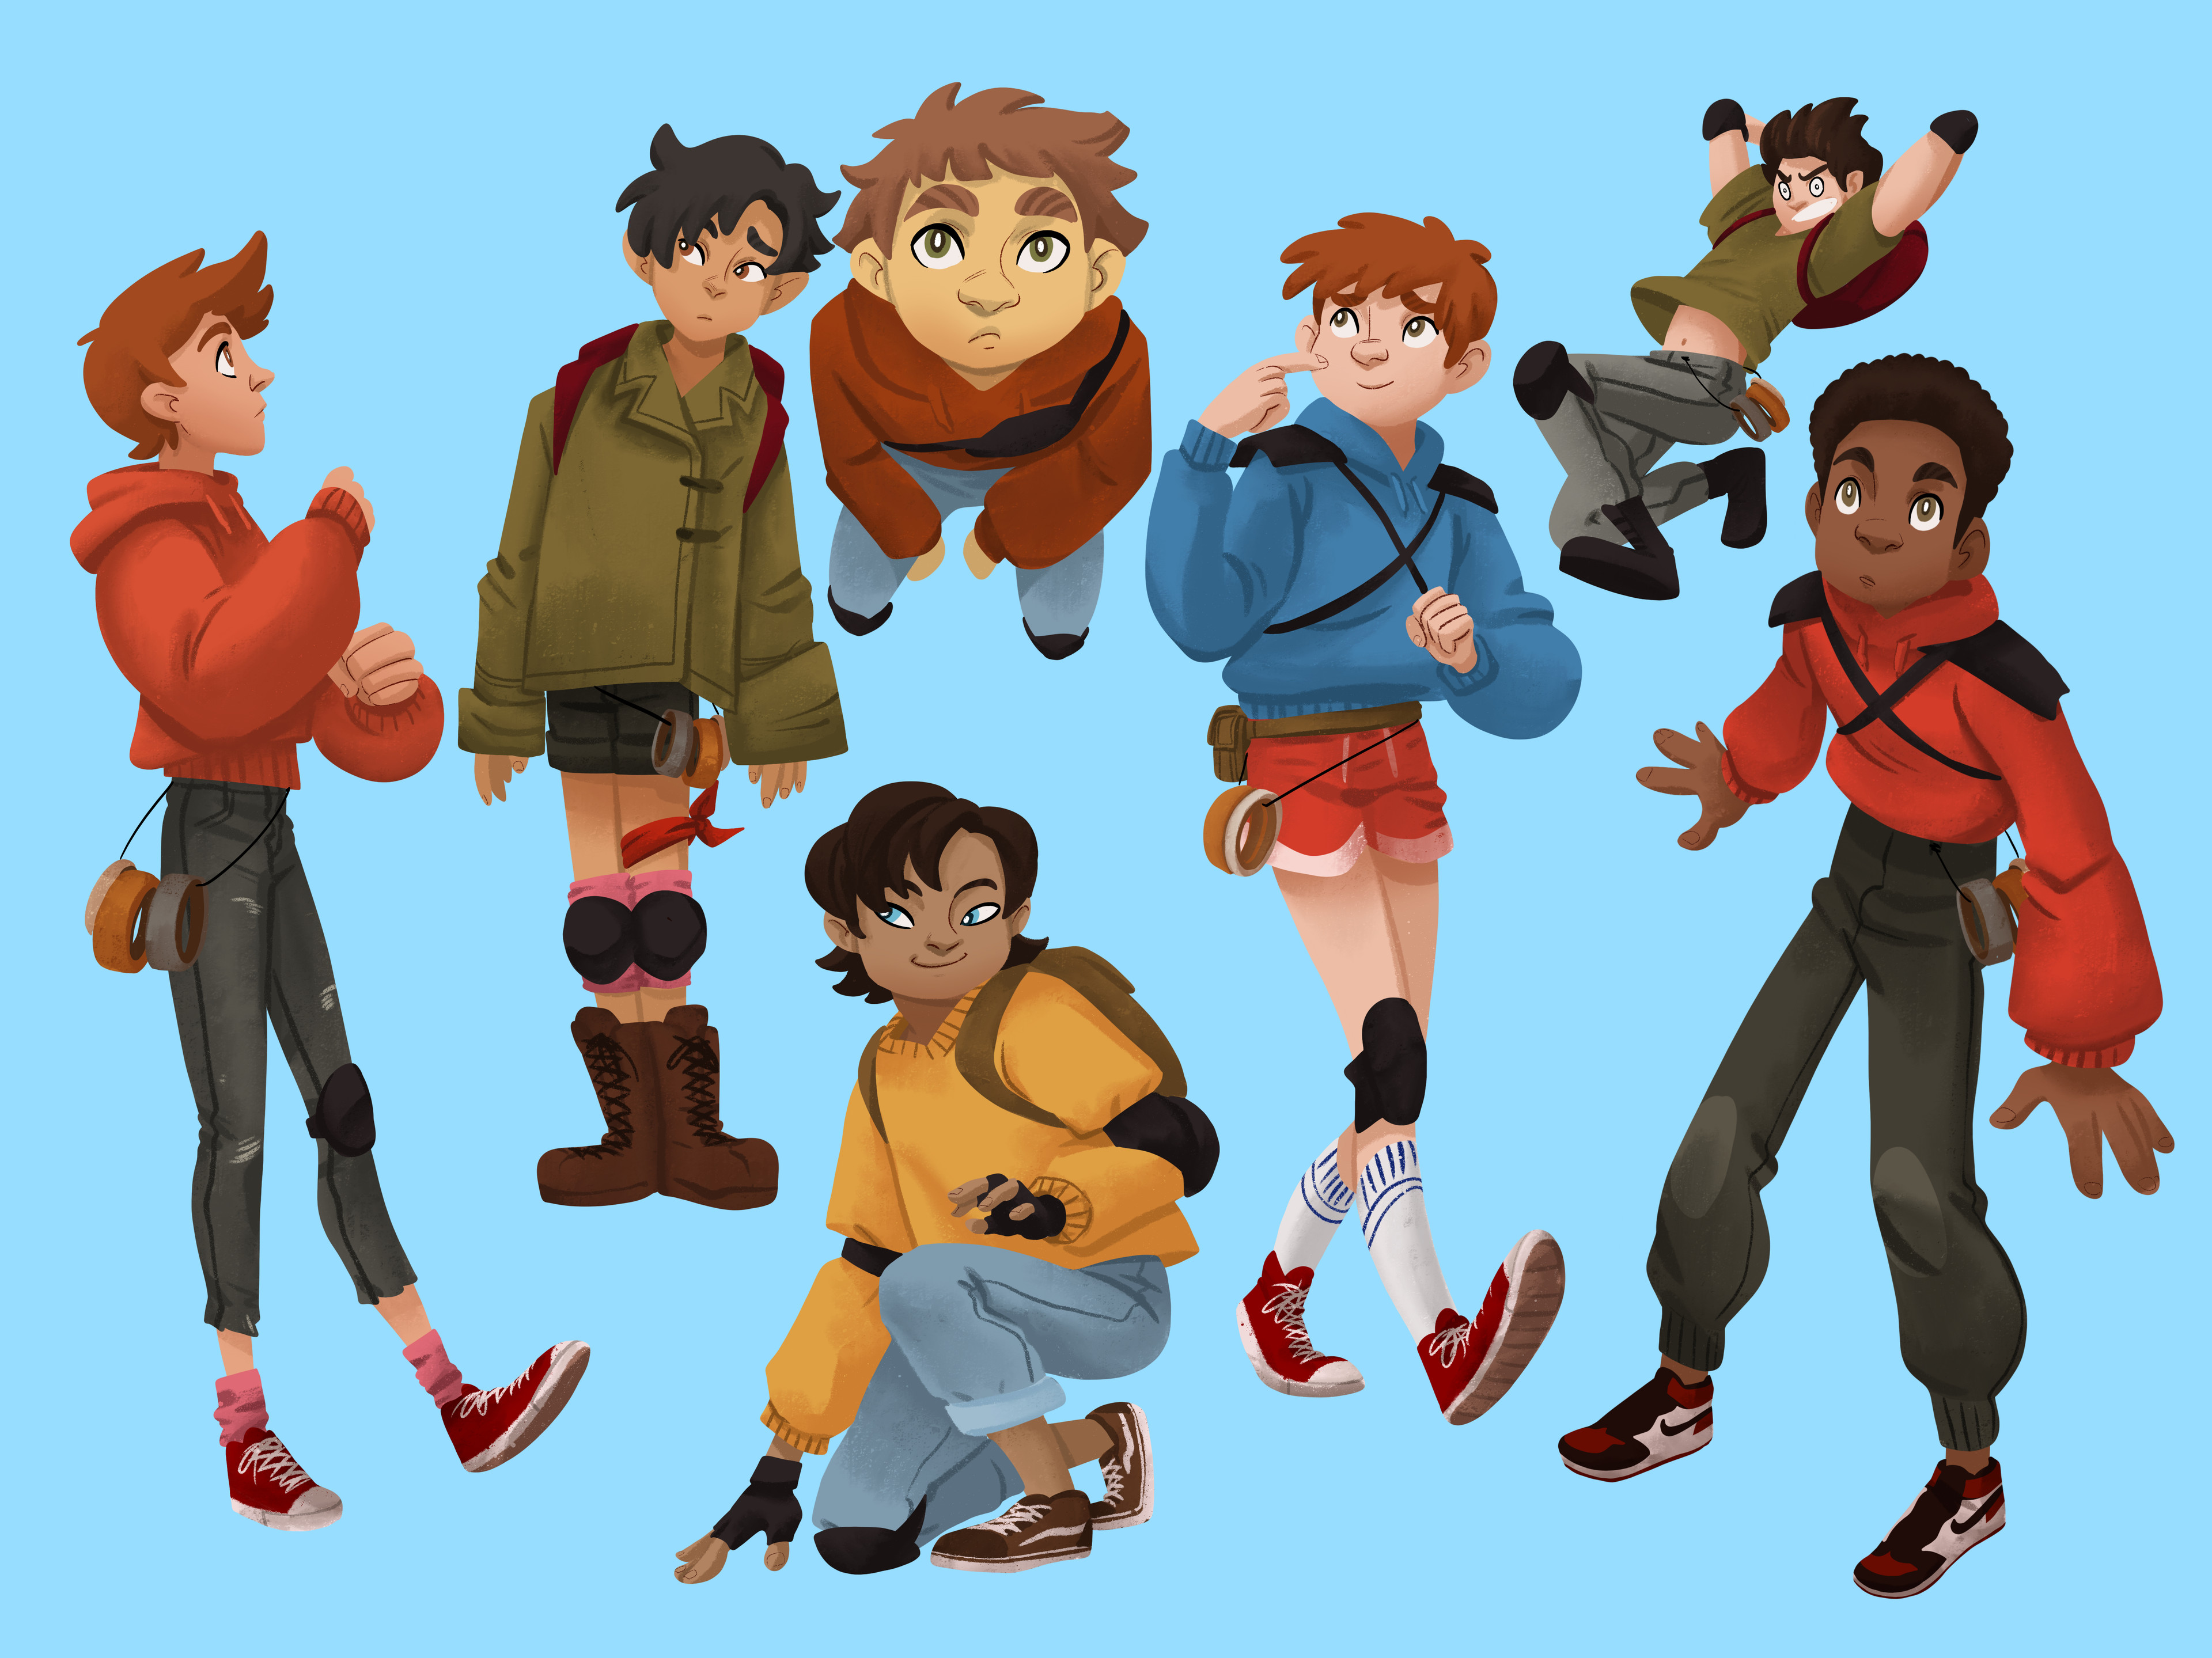 First character exploration, we knew early on what type of silhouette we wanted for Jack, so we explored a lot of looks with it.